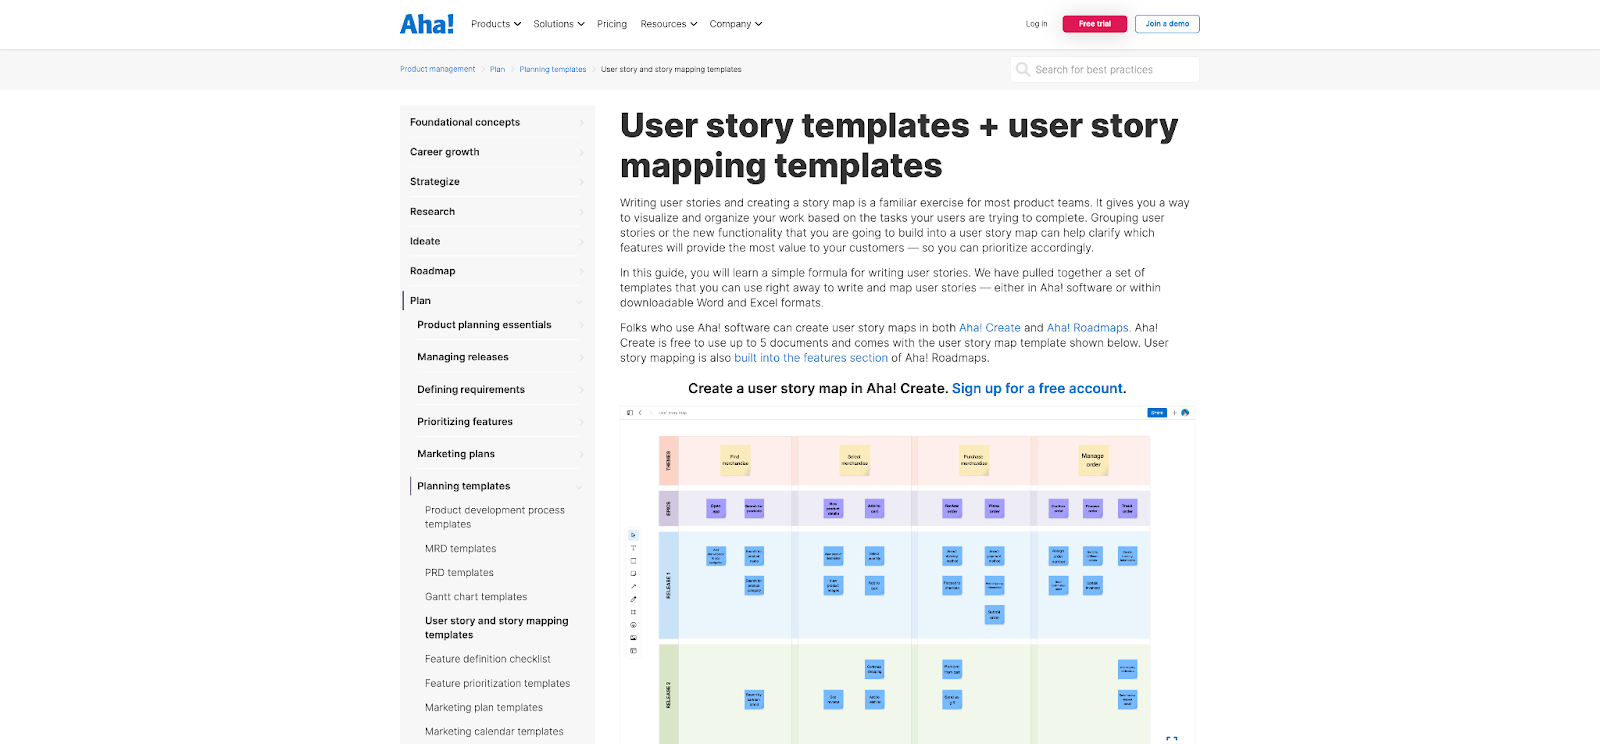 Find user story templates from the Aha.io product management software team